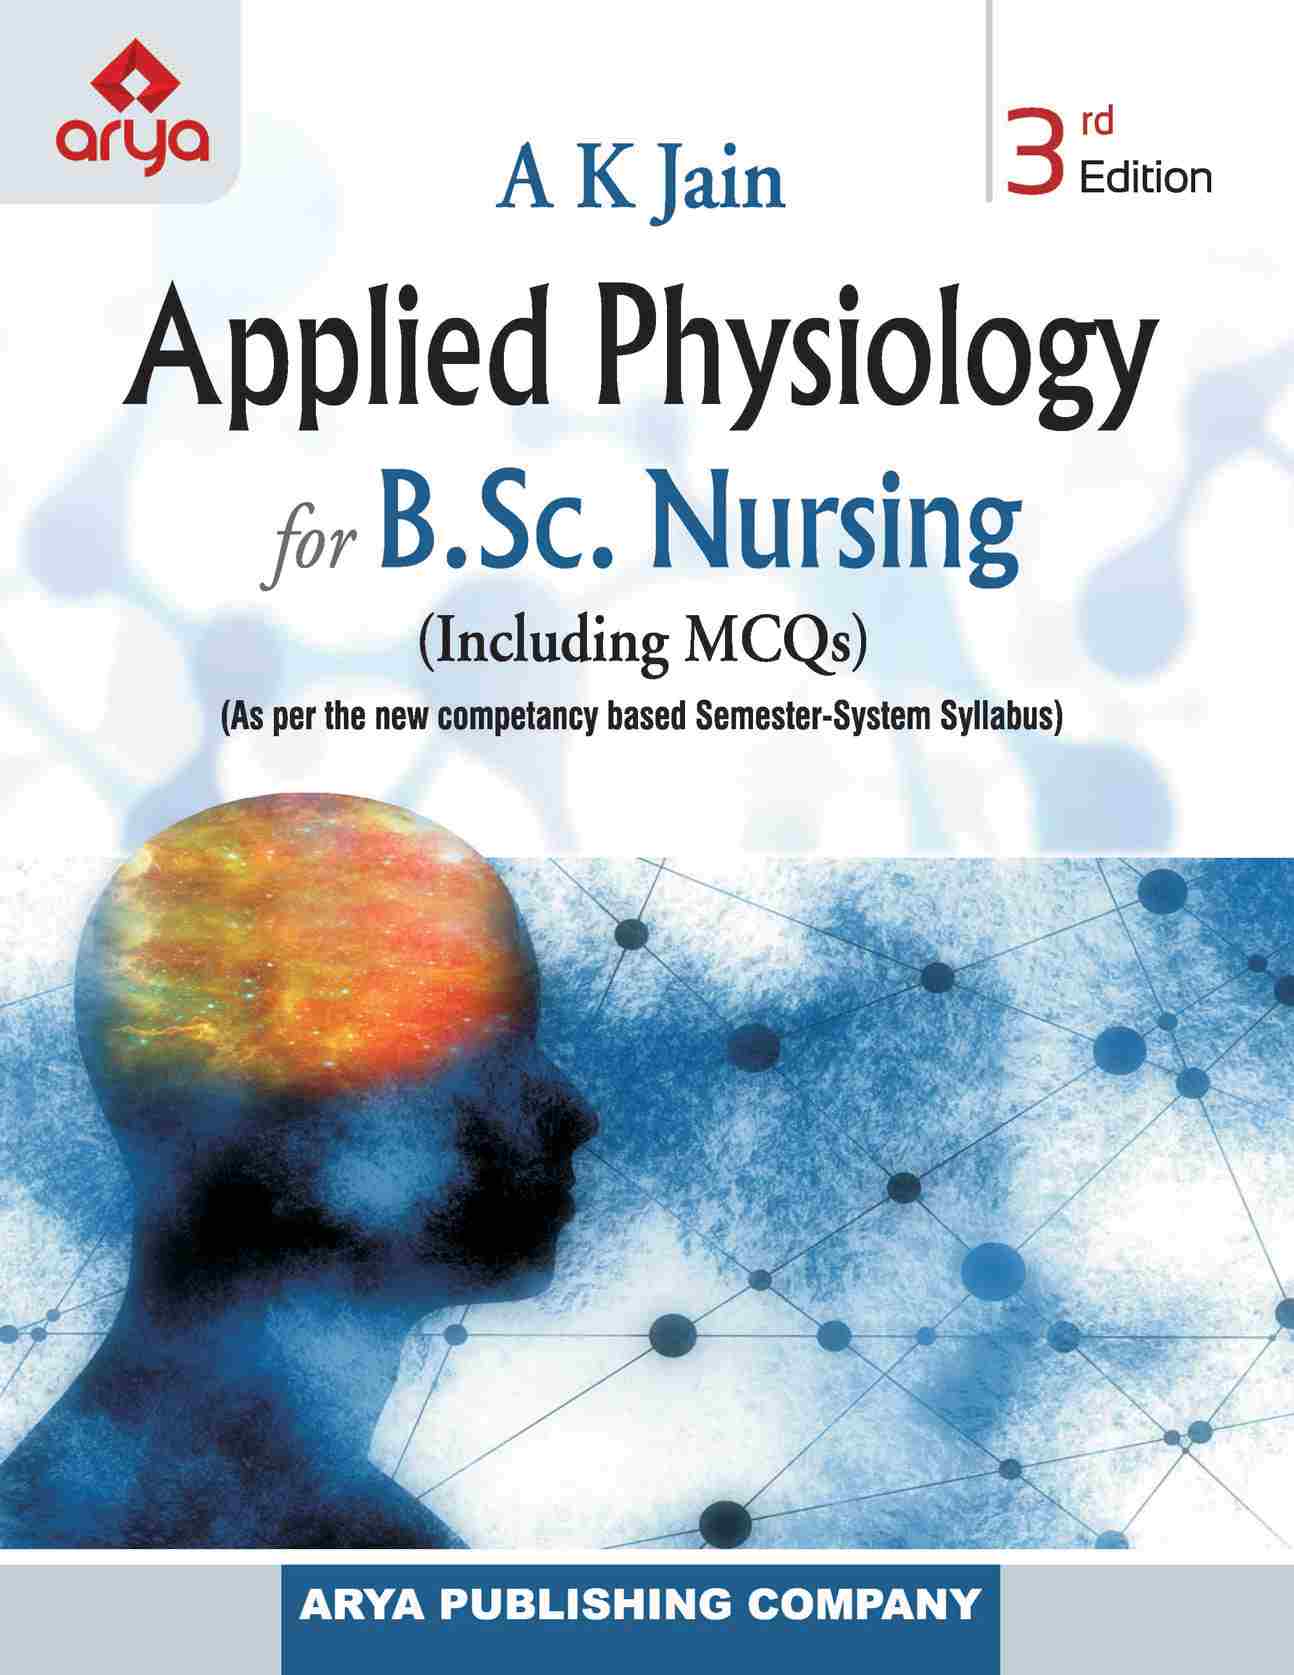 Applied Physiology for B.Sc. Nursing 